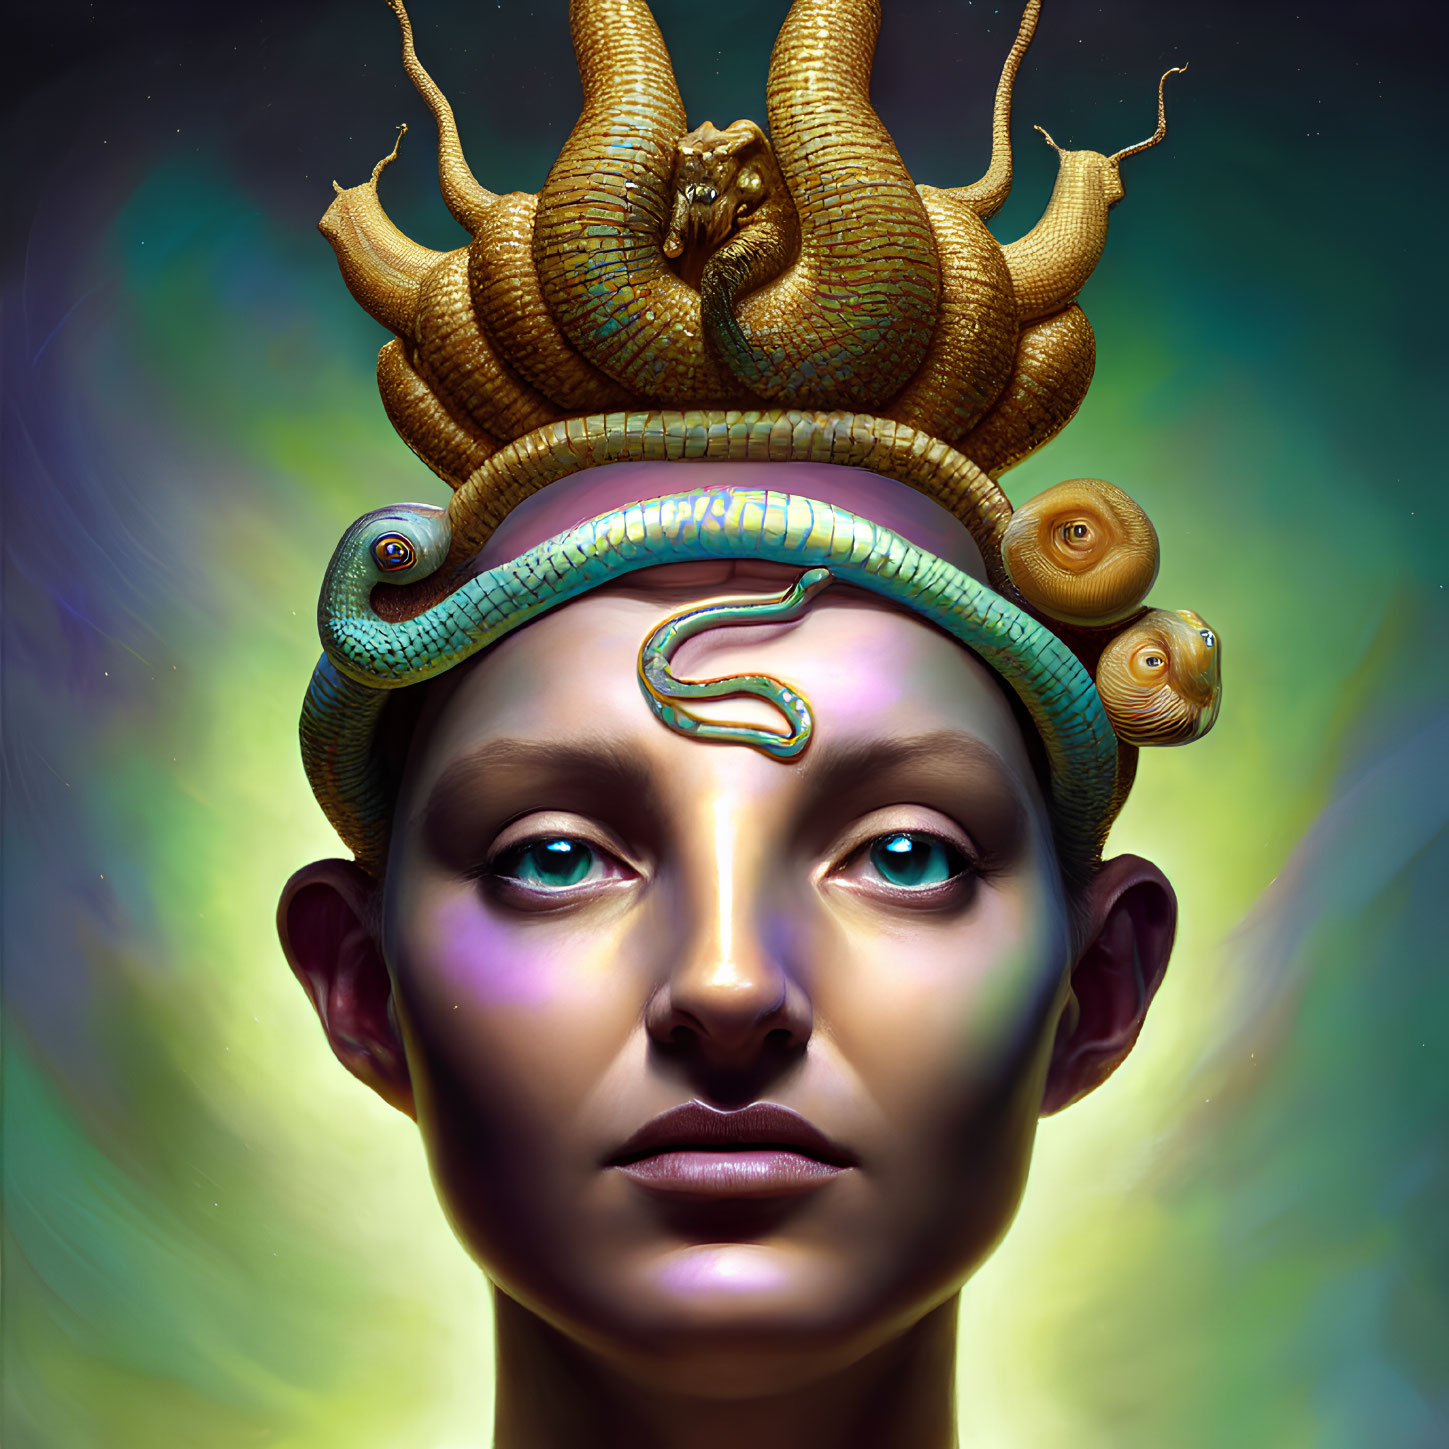 Solemn person in fantastical headdress with golden serpents and snails on lumines